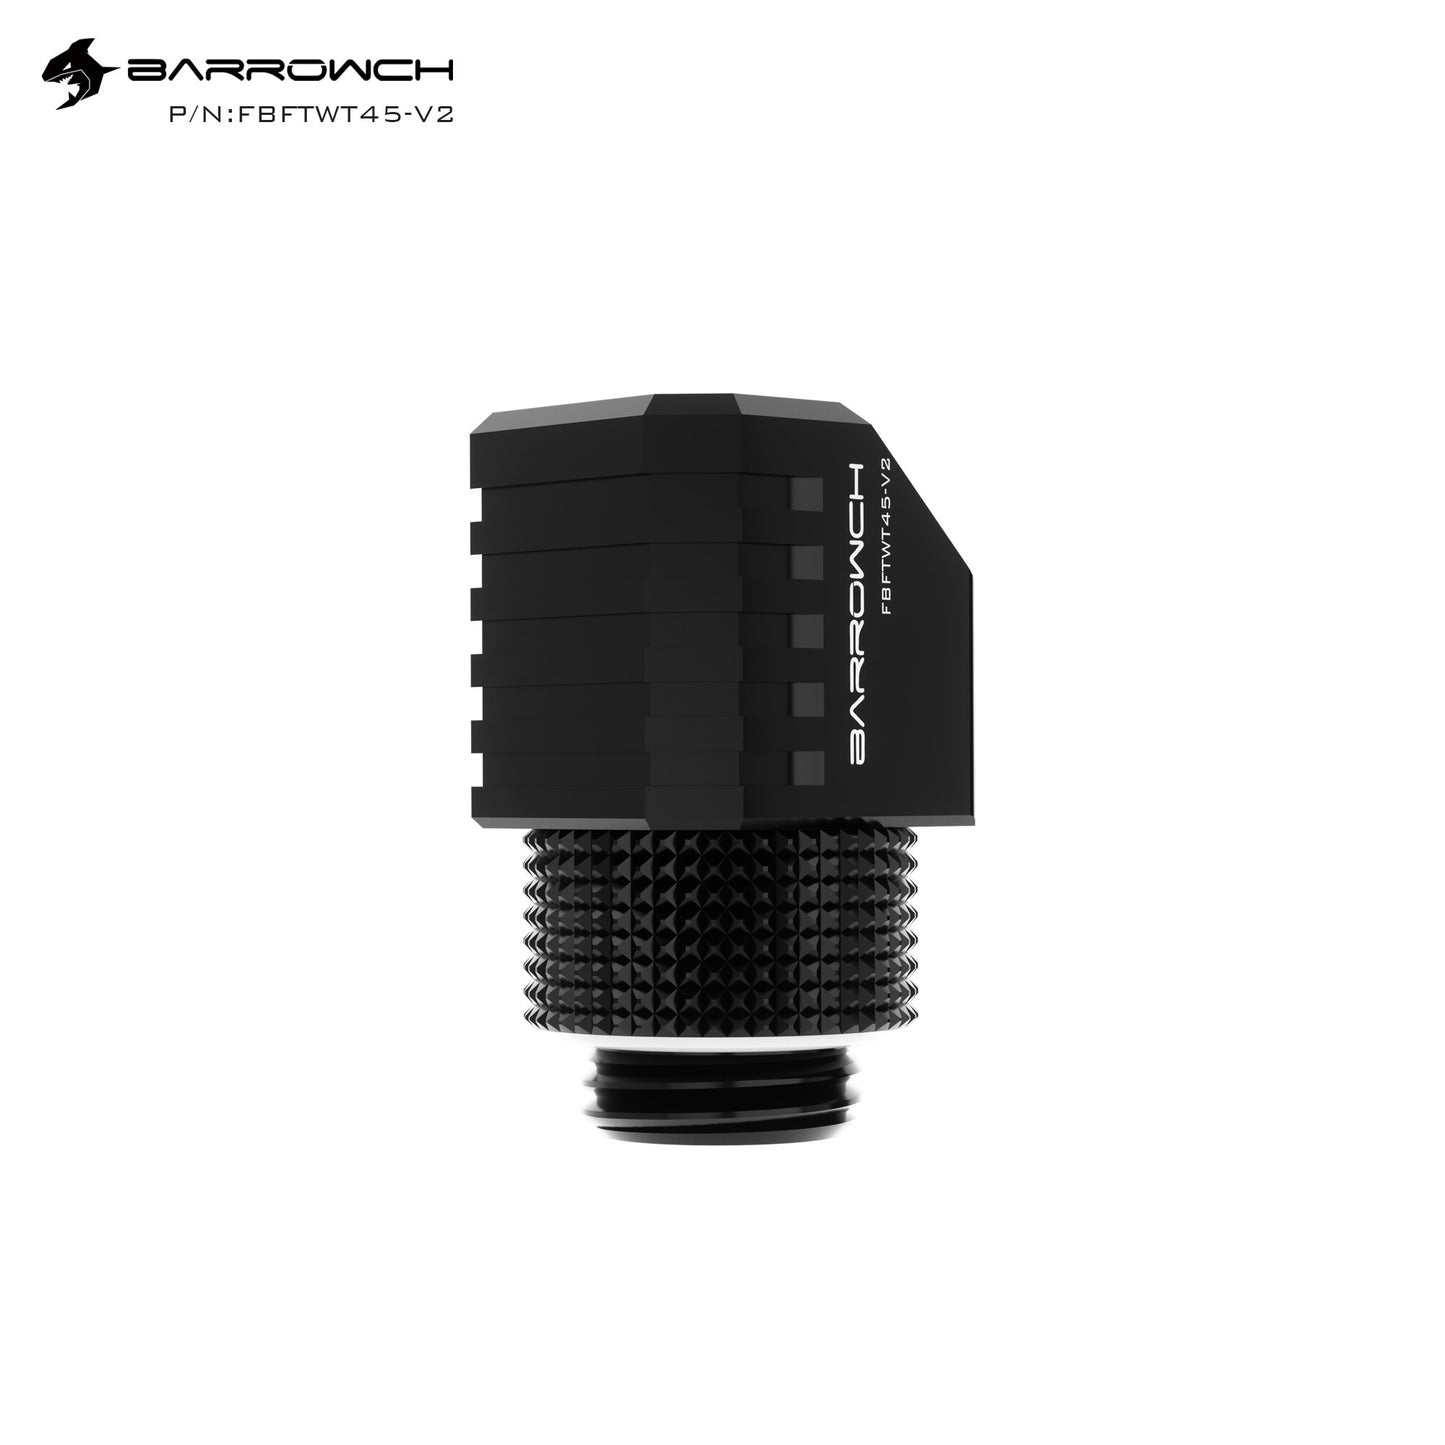 Barrowch 45 90 Degree Rotary Adapter Fitting, Limited Version for Water Cooling Tube Angled Fitting， FBFTWT 45/90-V2